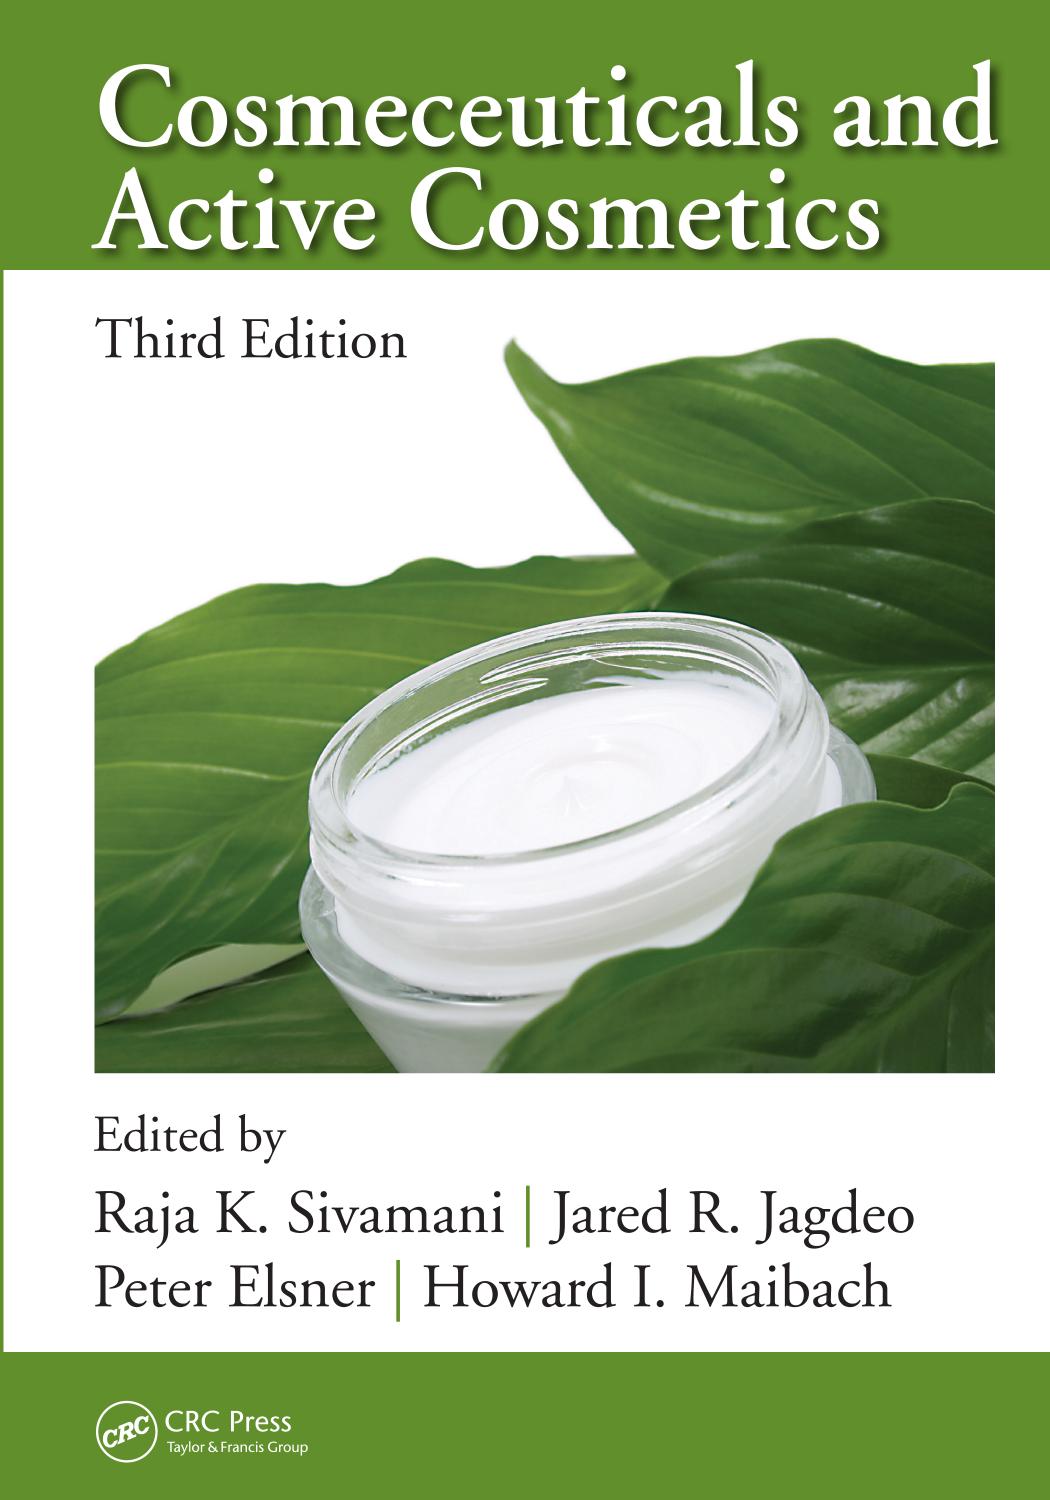 Cosmeceuticals and Active Cosmetics, Third Edition.